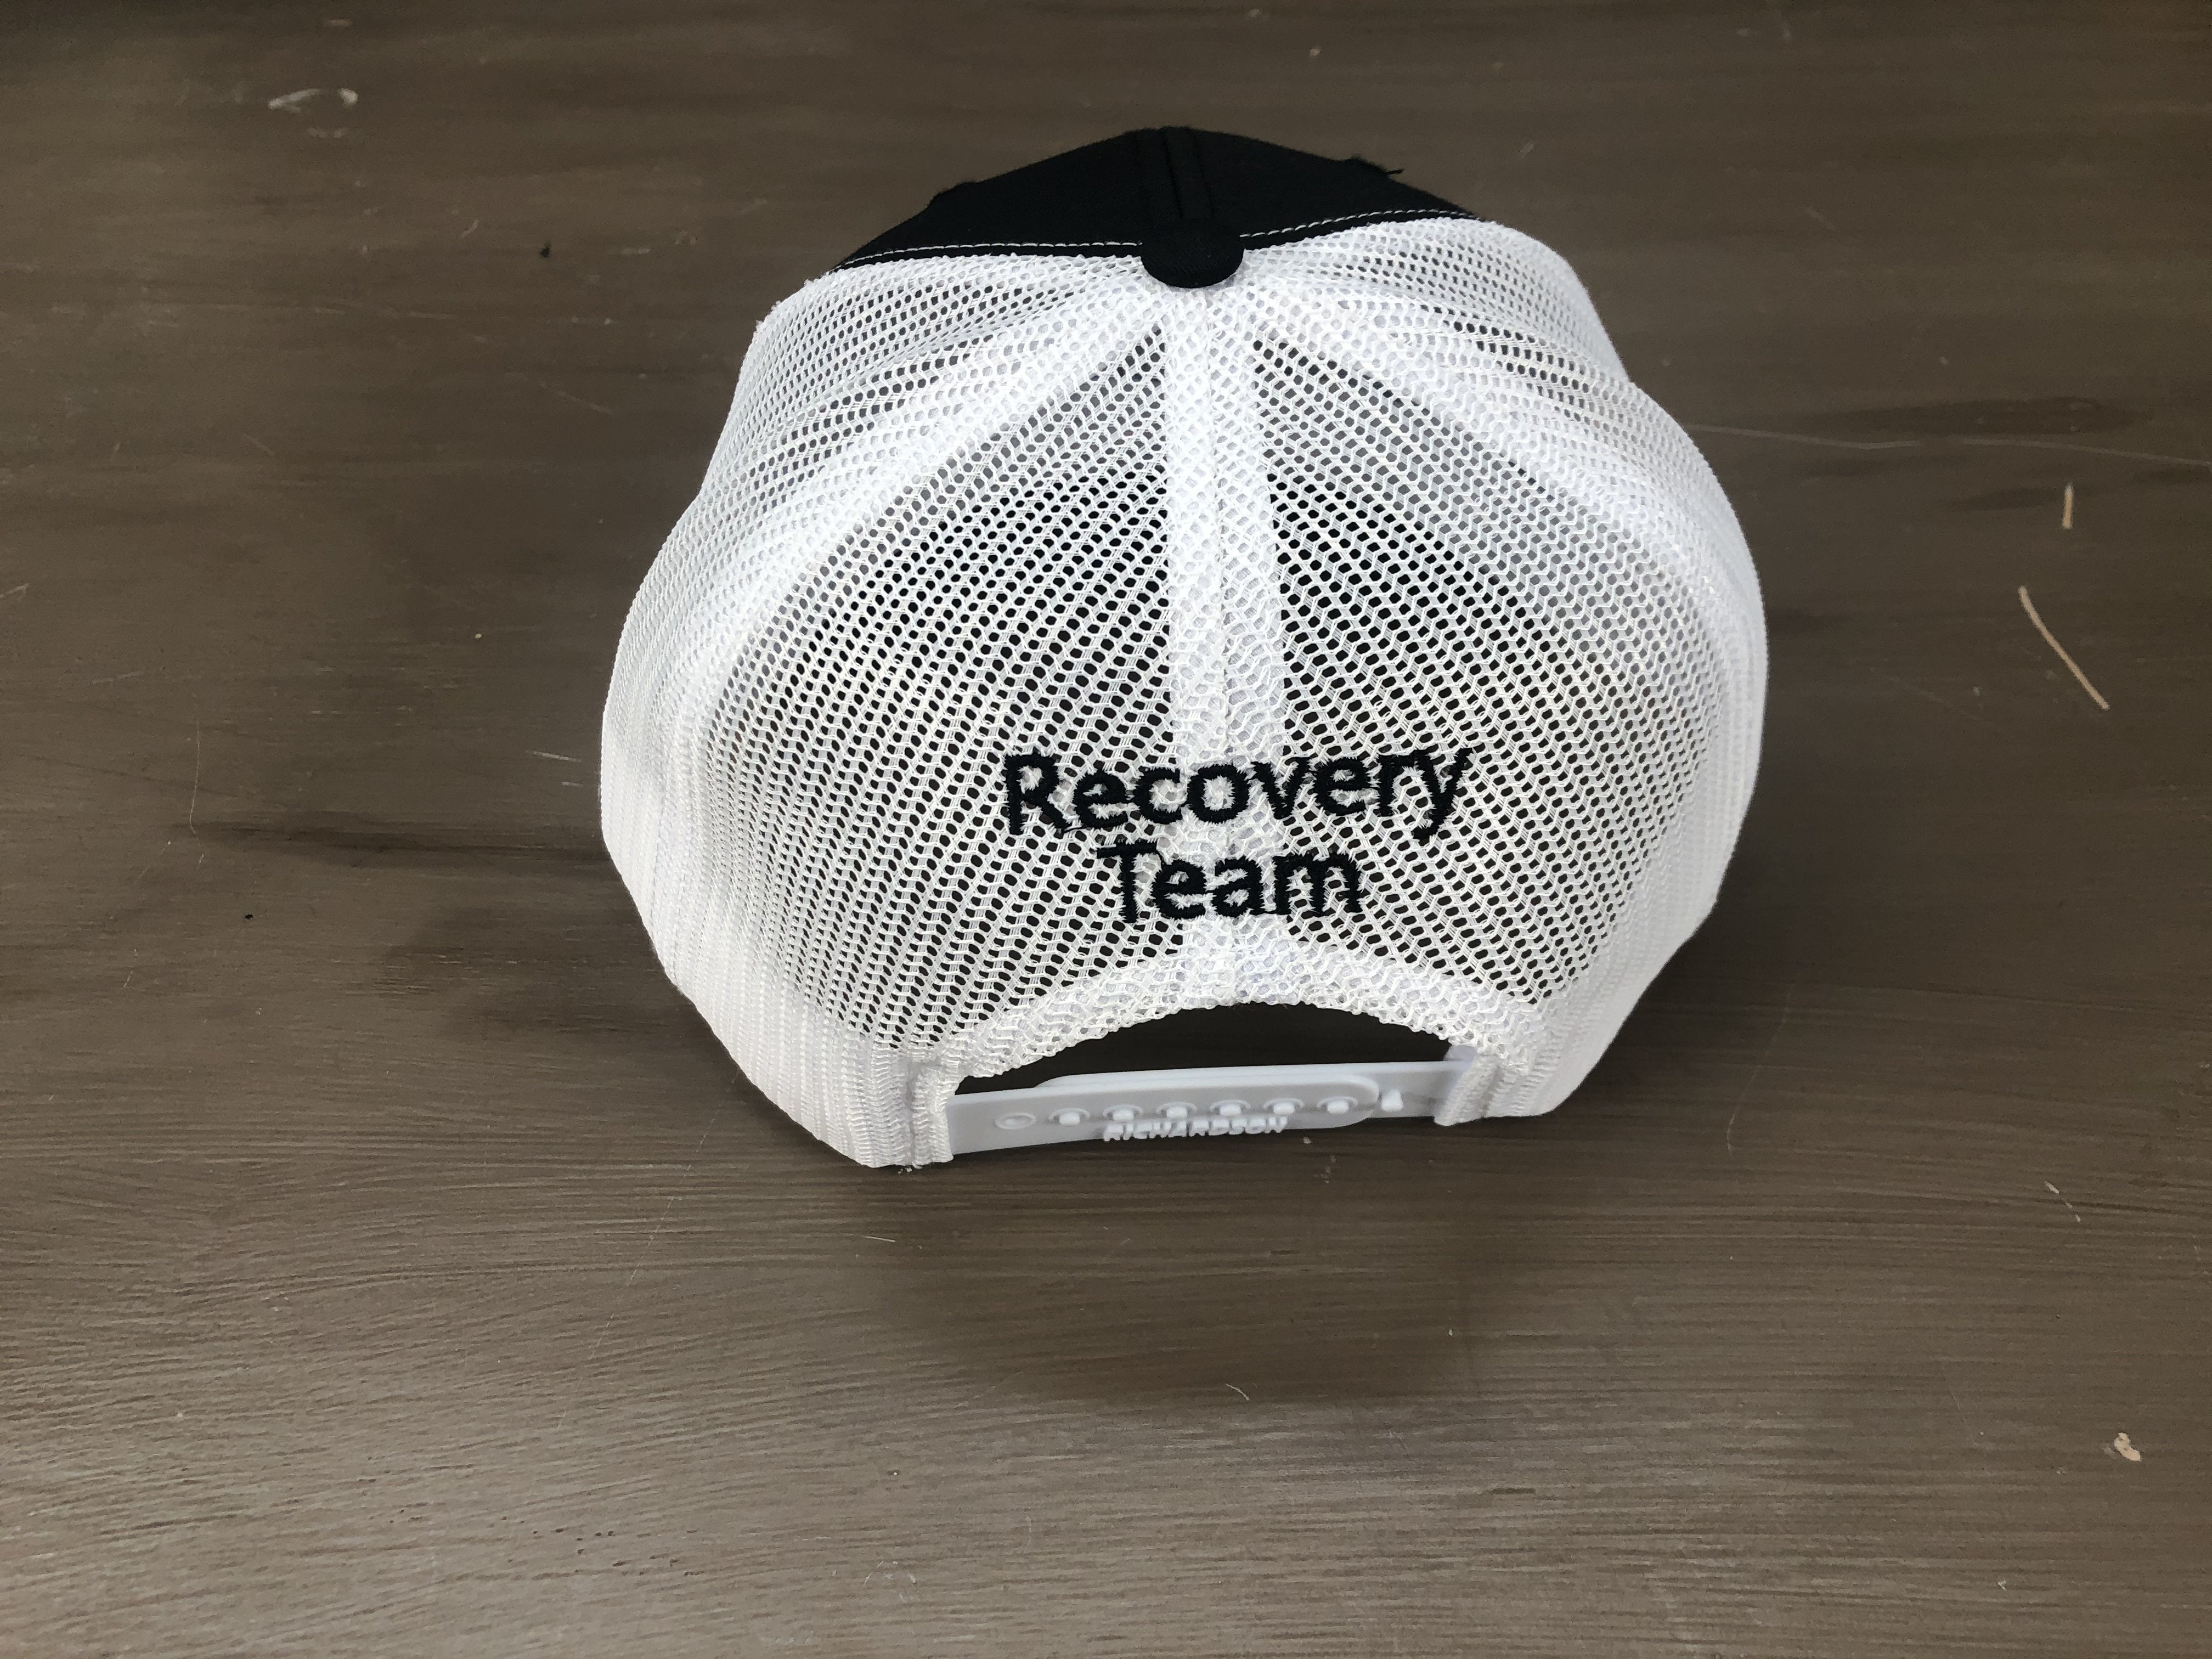 High Plains Prospectors - Recovery Team Metal Detecting Hat Black & White Back